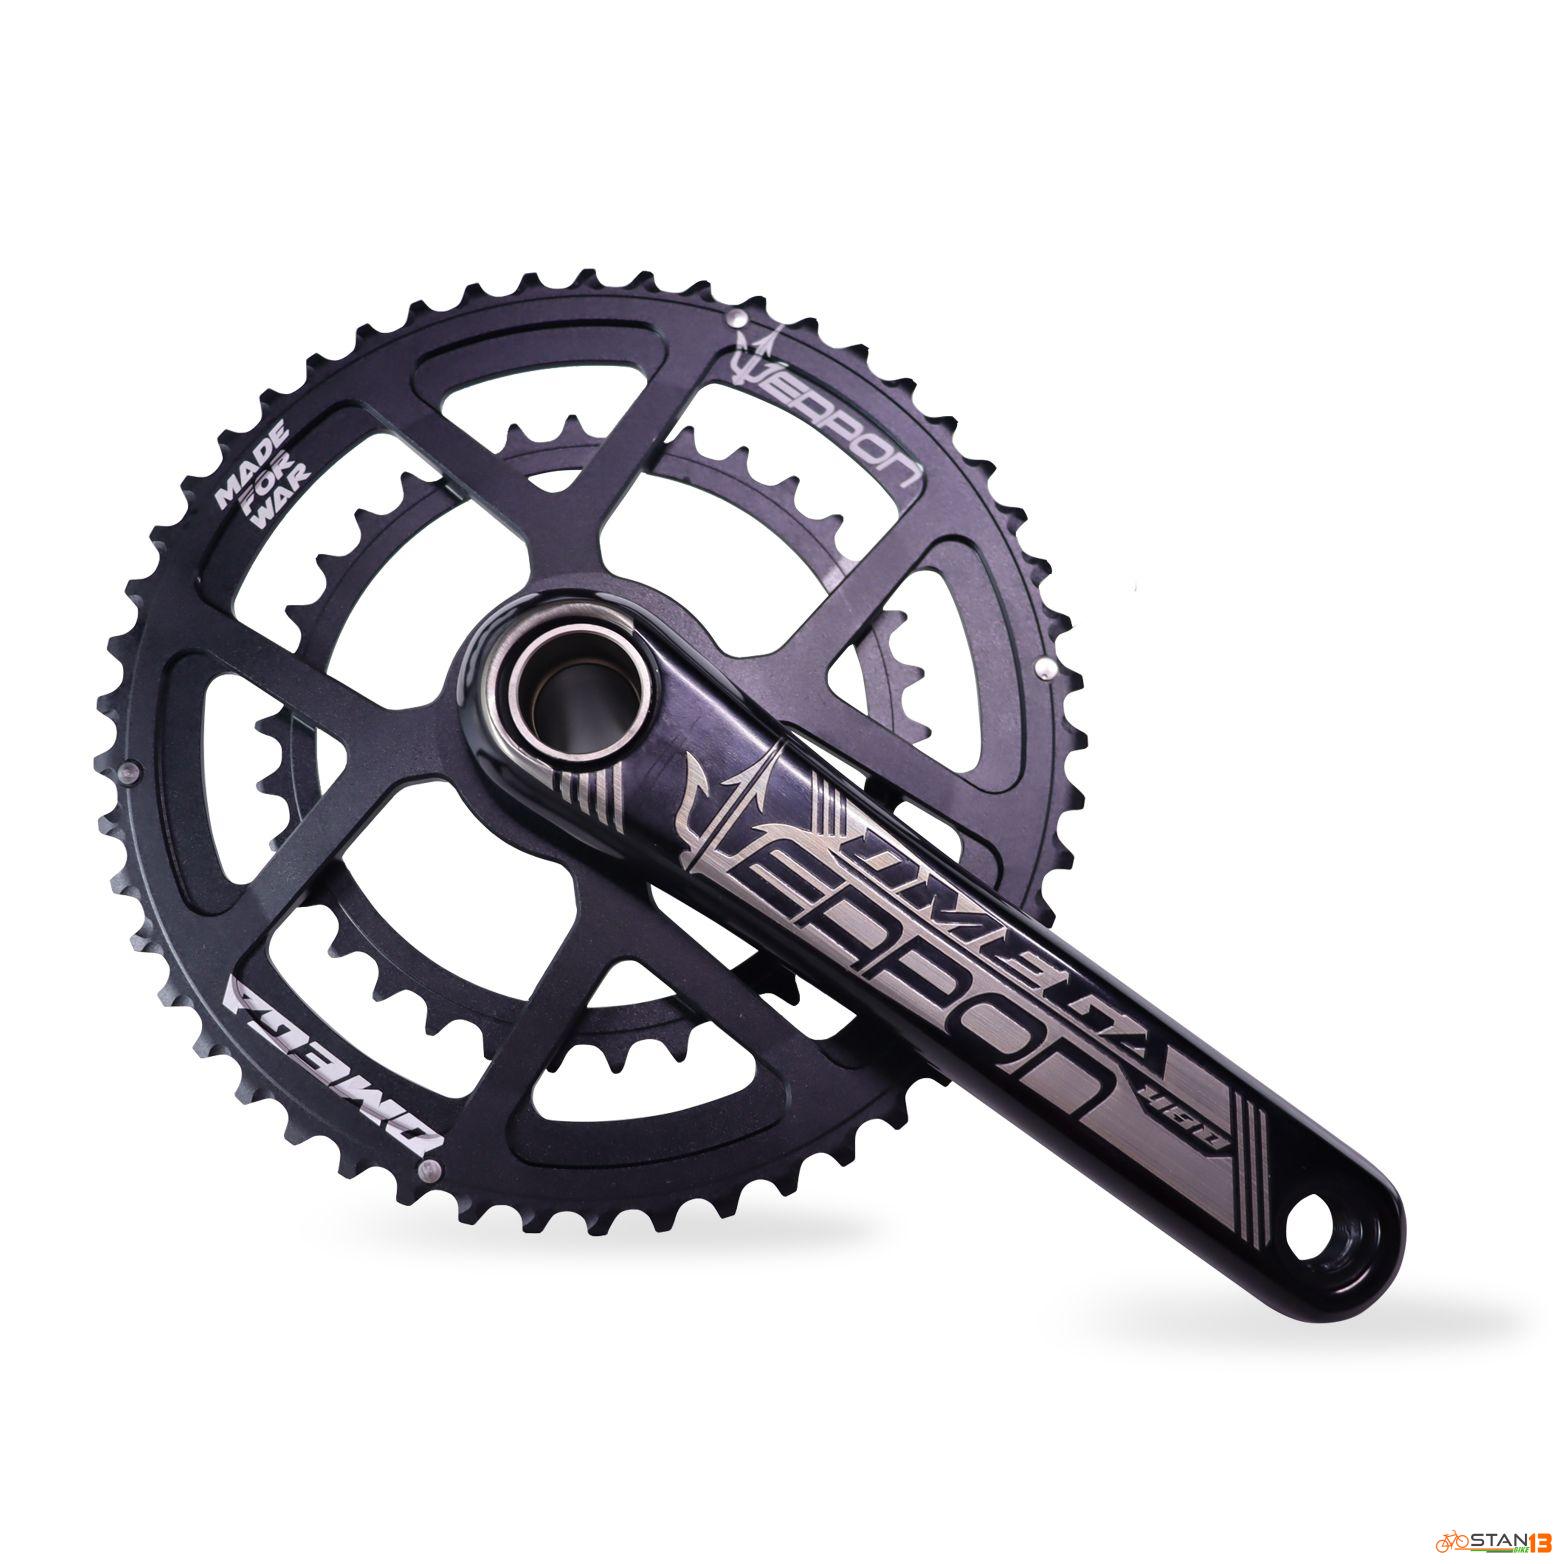 Crank Weapon Omega 480 Alloy Road Bike Crank Set with BB Super Light Weight